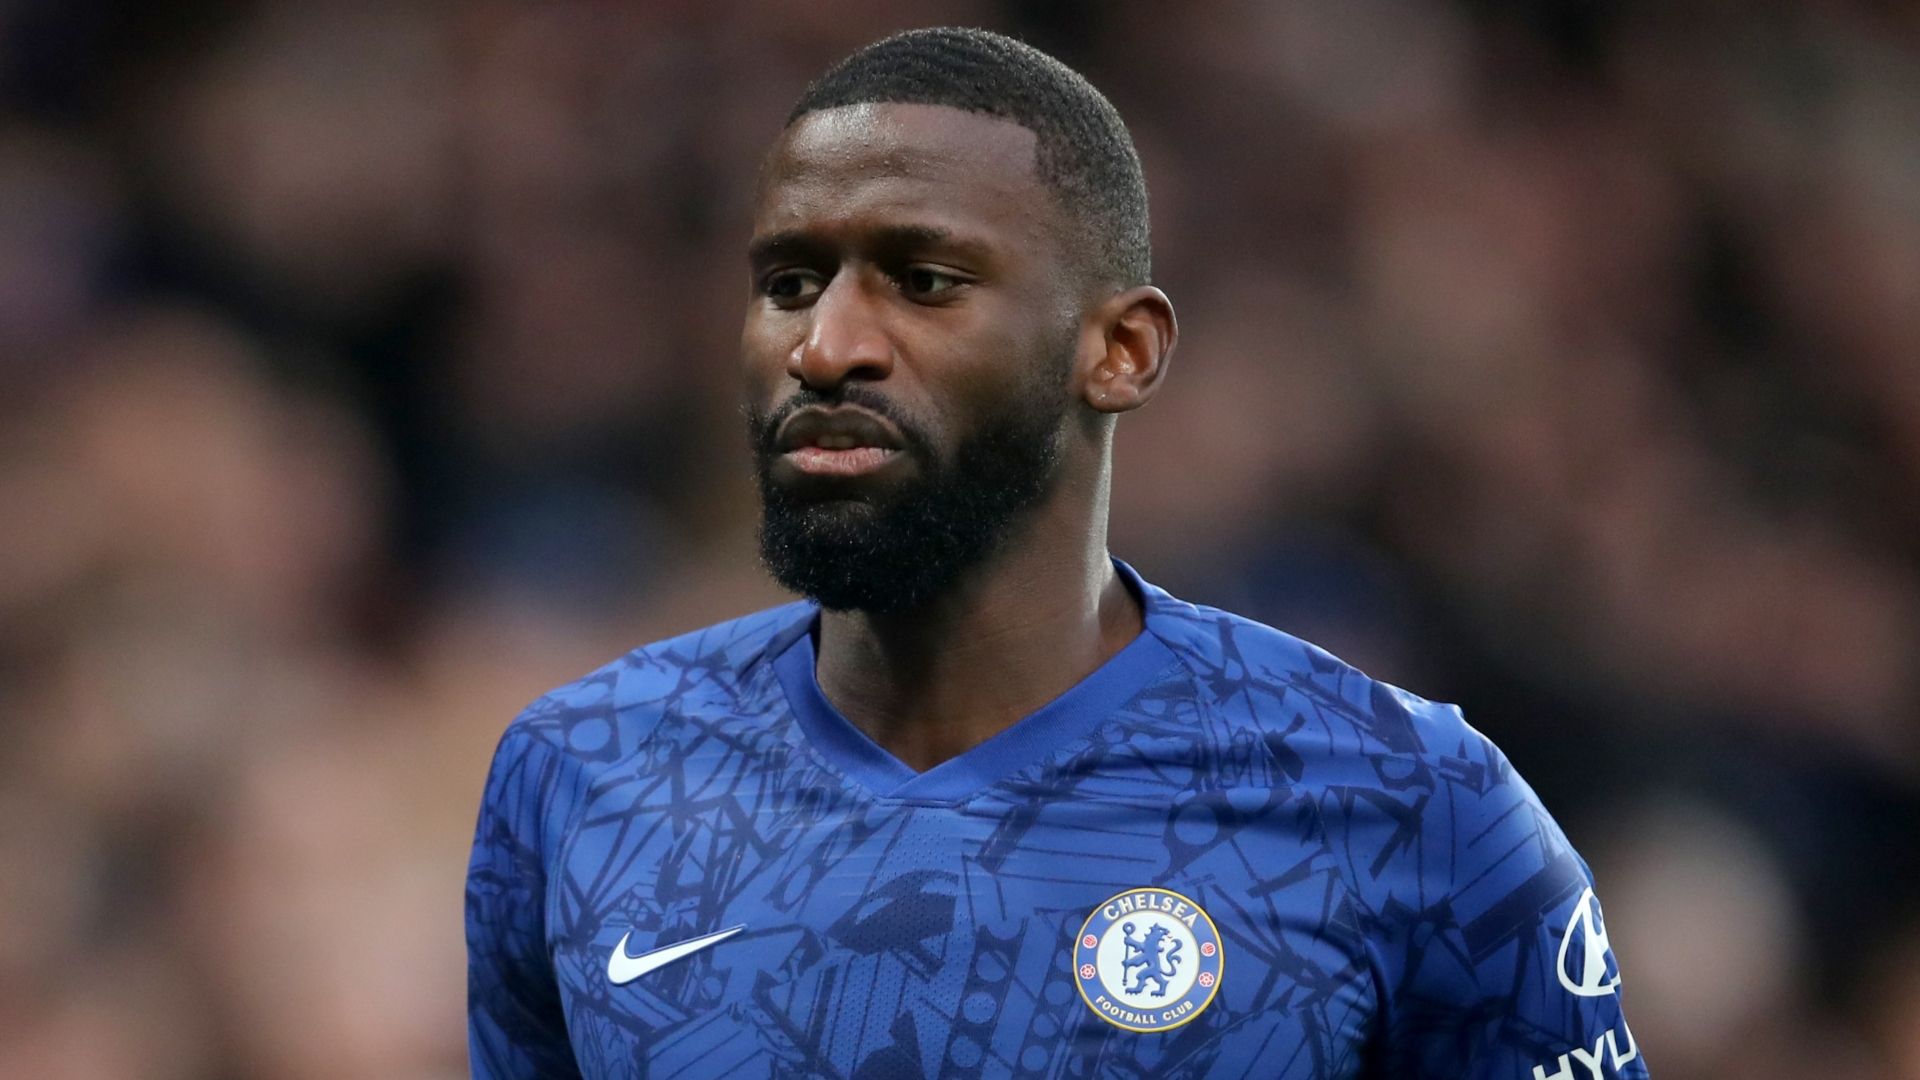 Rudiger tried everything to leave Chelsea and will try again in the winter, says Germany boss Low